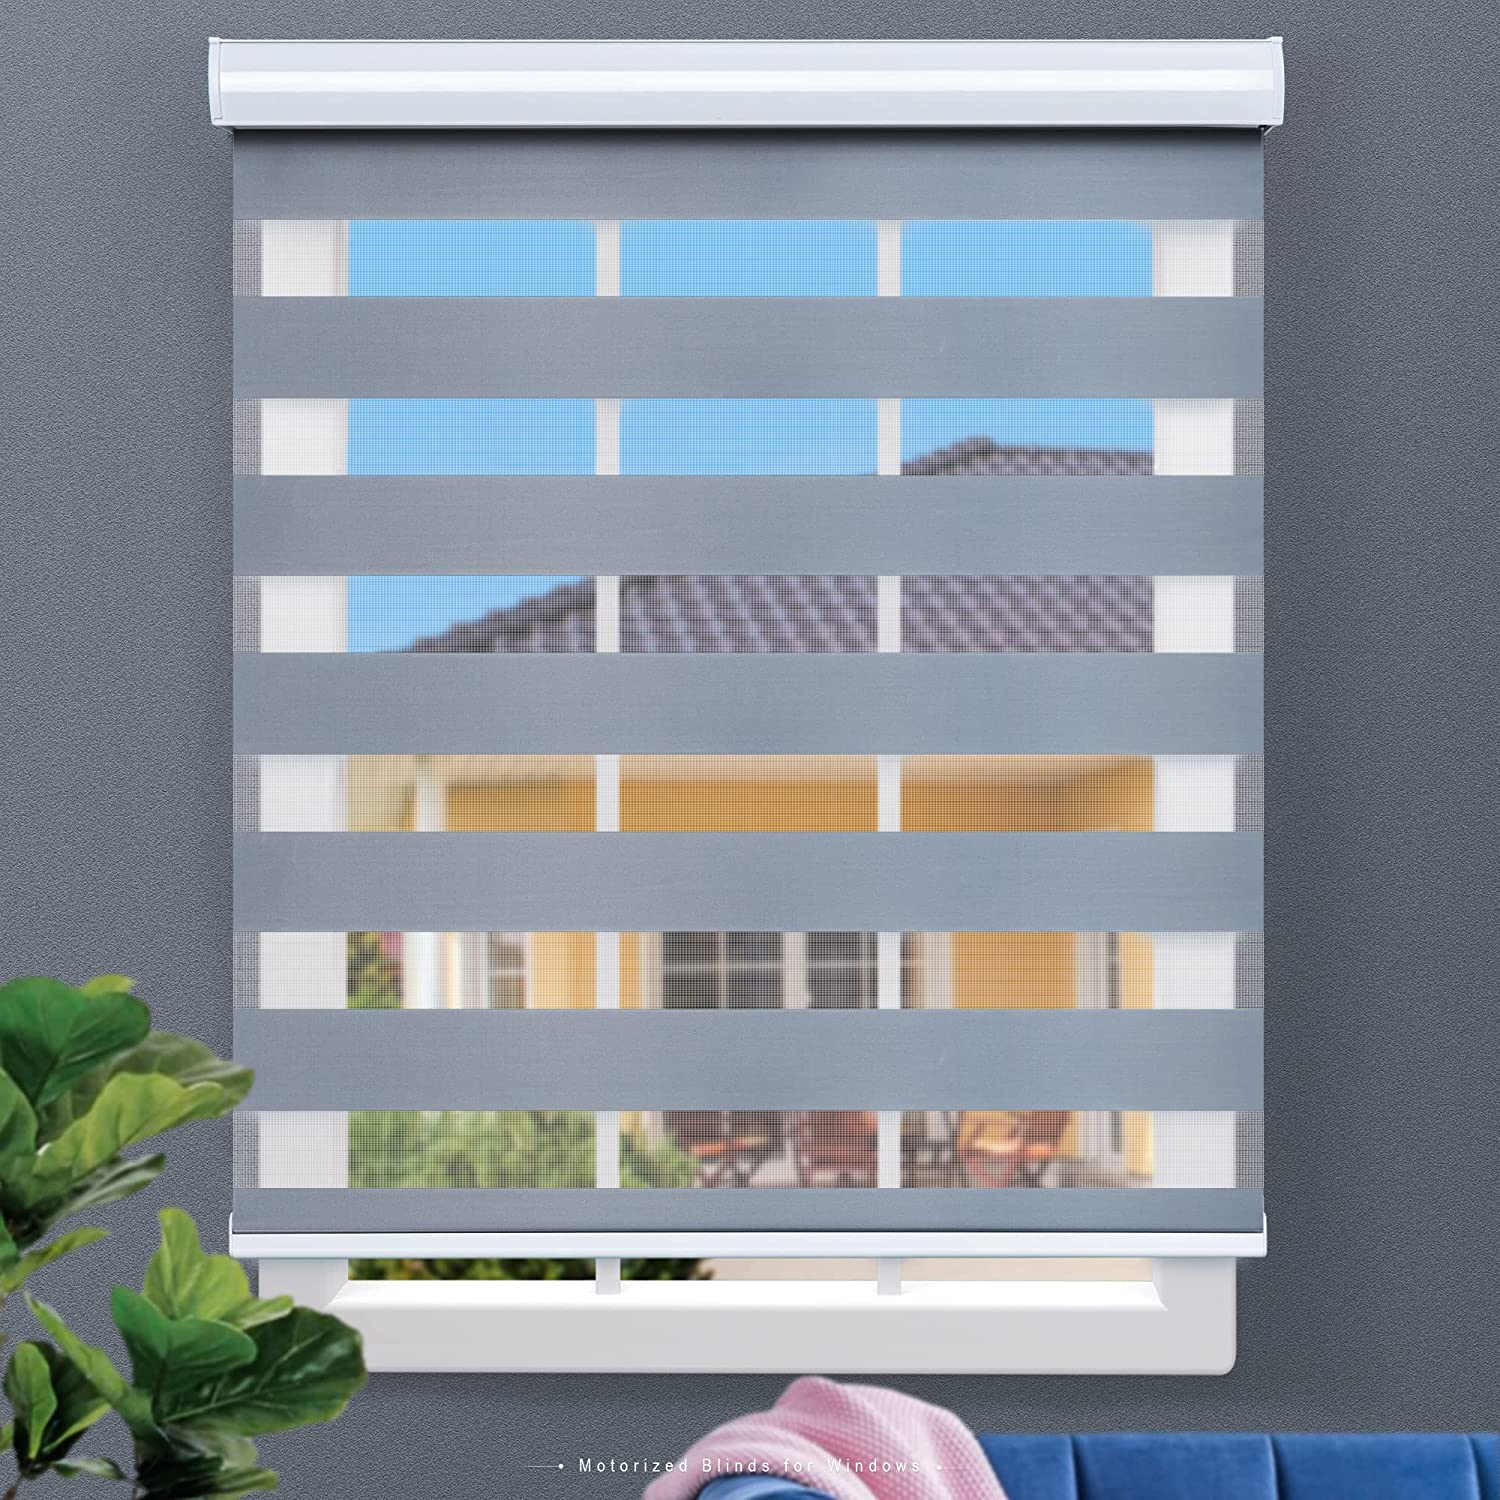 JaeJaes Motorized Zebra Blinds for Windows Shades, Smart Windows Blinds with Remote Control, Compatible with Alexa and Privacy Light Filtering, White, White, 23